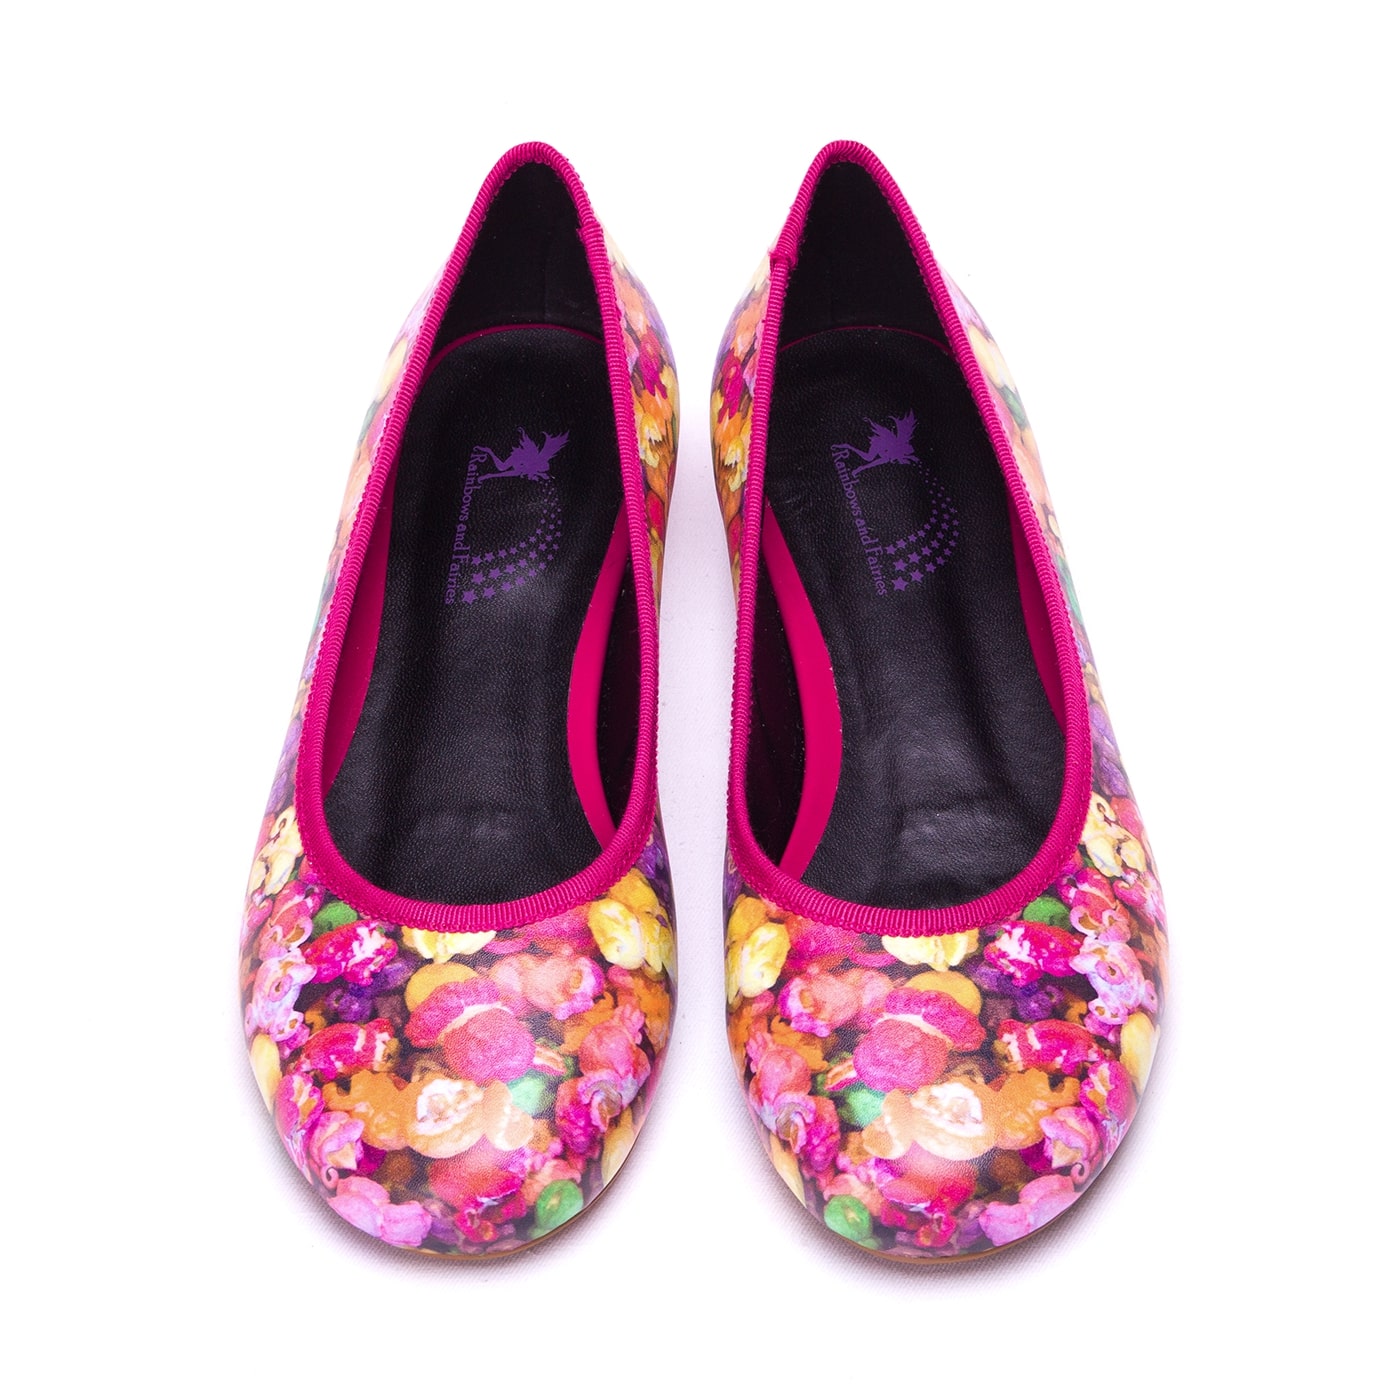 Rainbow Popcorn Ballet Flats by RainbowsAndFairies.com (Popcorn - Colourful - Lollies - Quirky Shoes - Slip Ons - Comfy Flats) - SKU: FW_BALET_PCORN_ORG - Pic 02